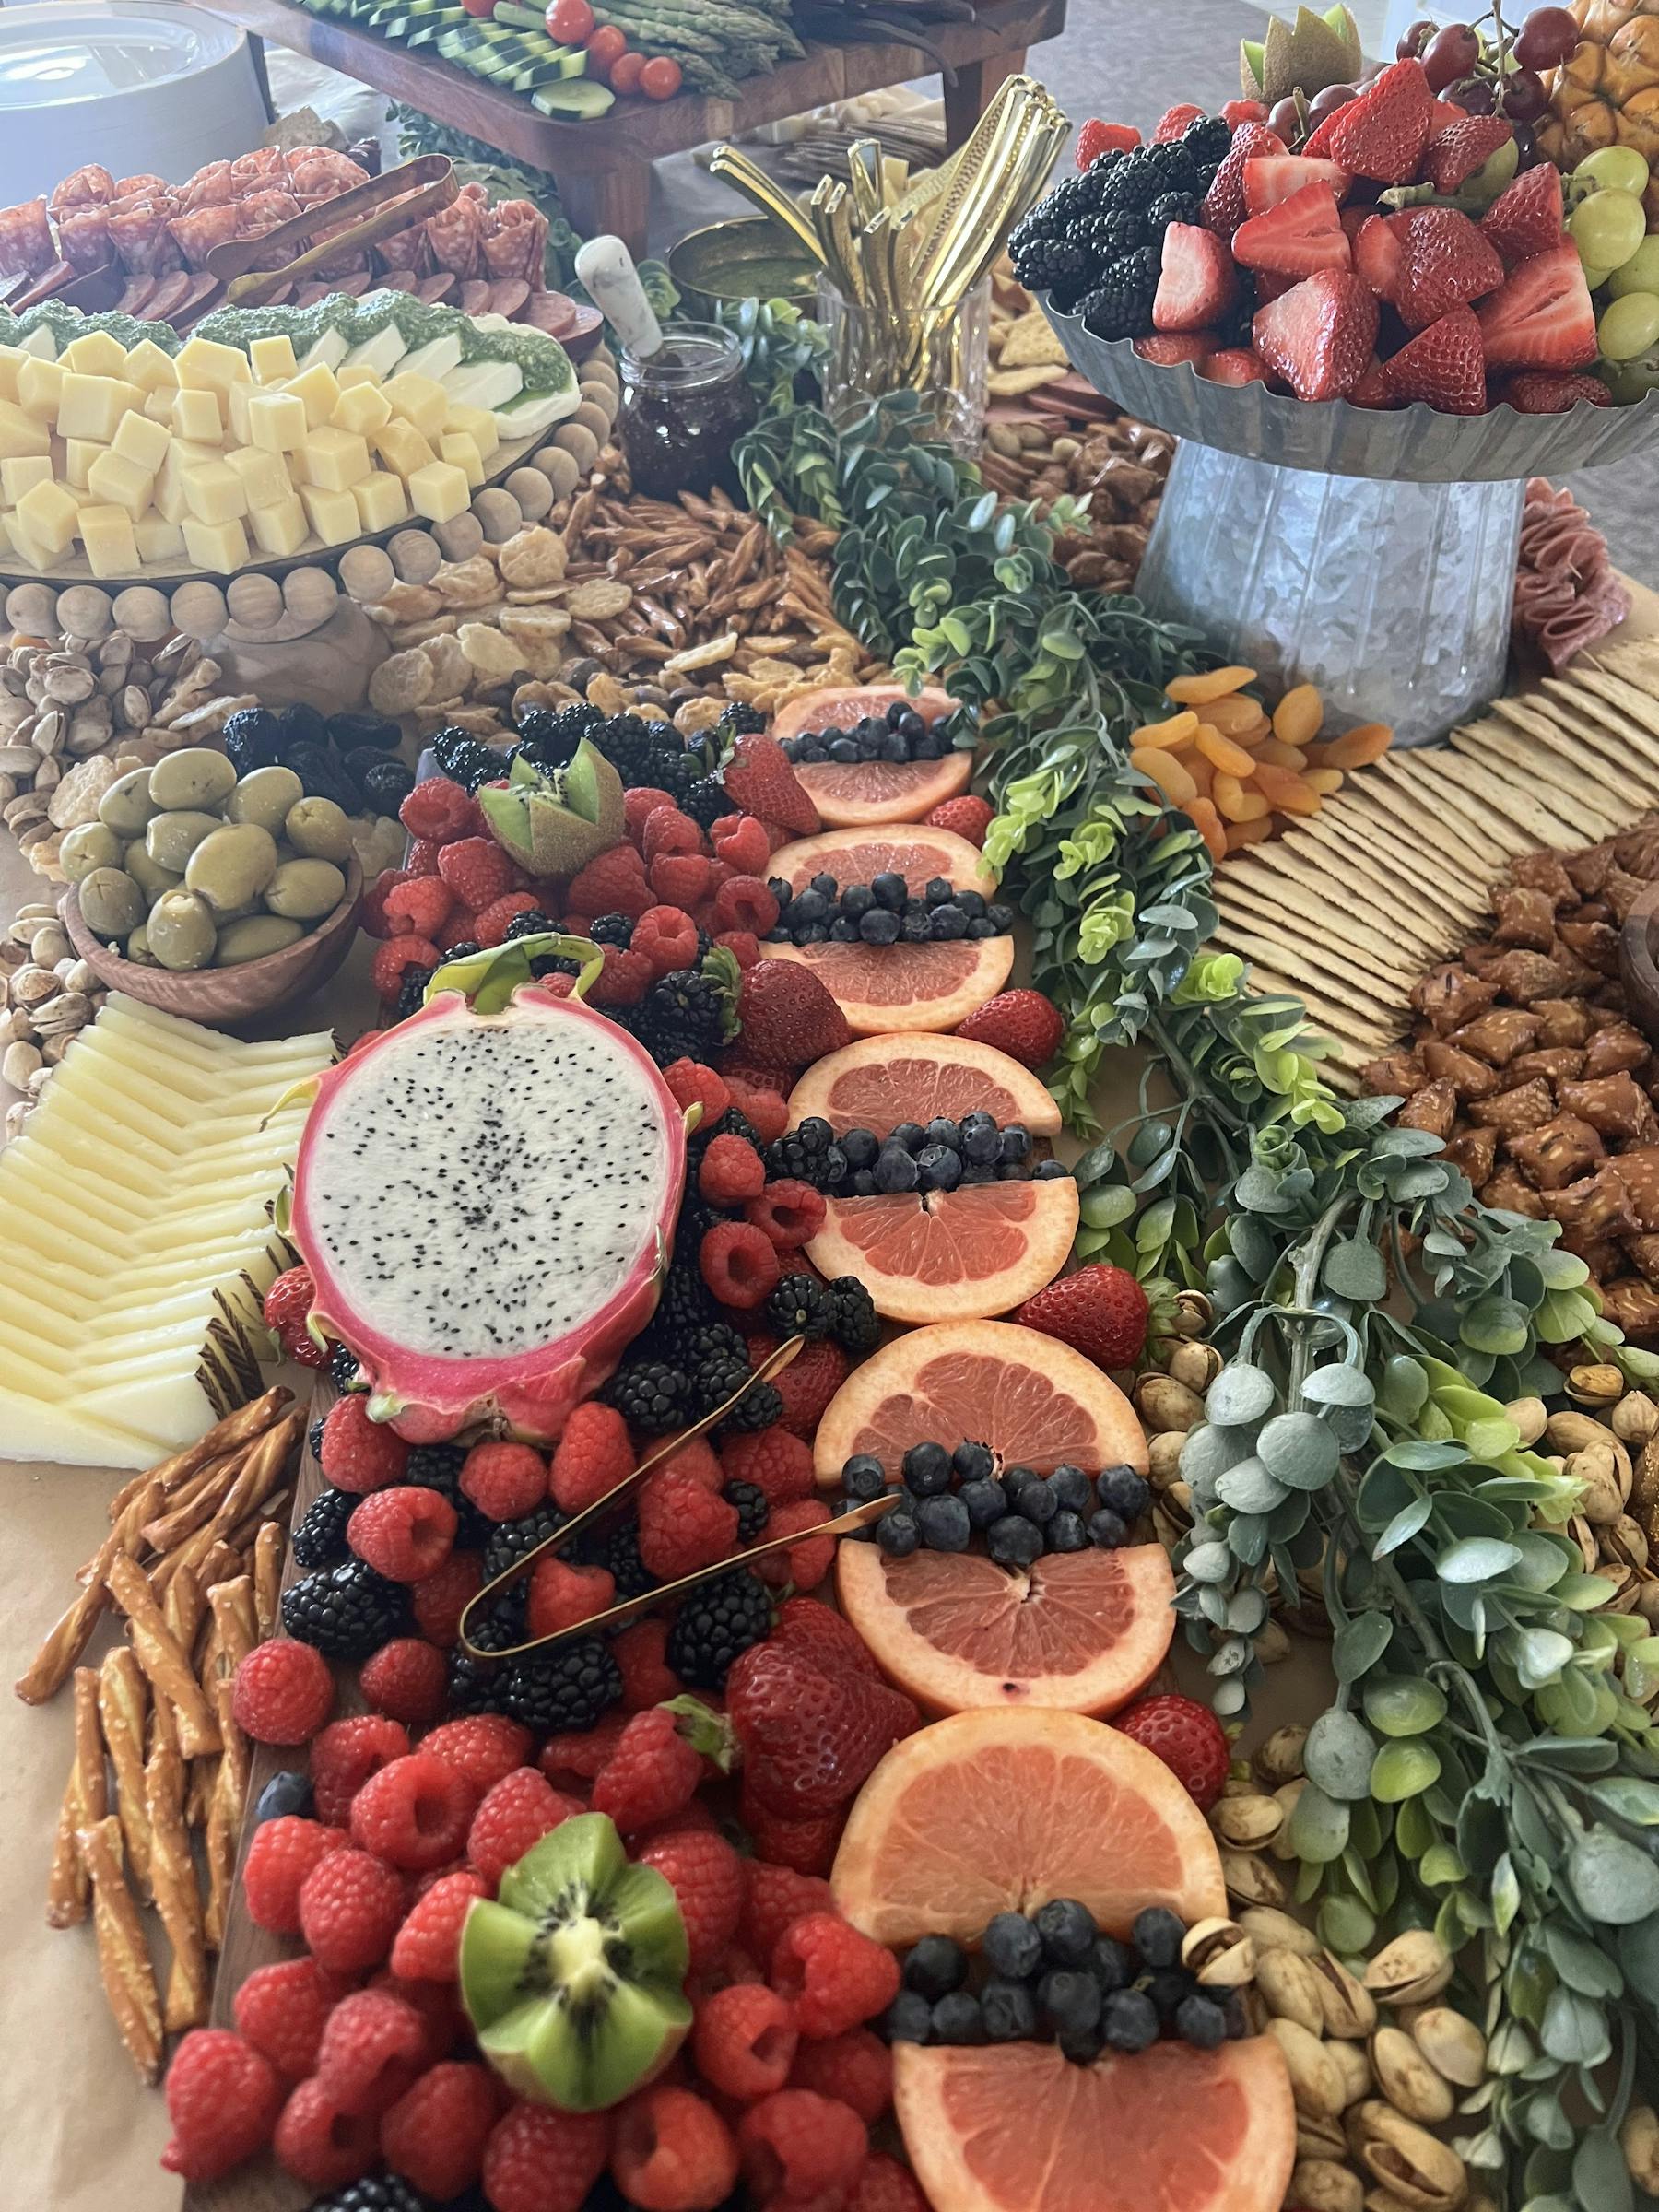 a group of fruit and vegetables on display